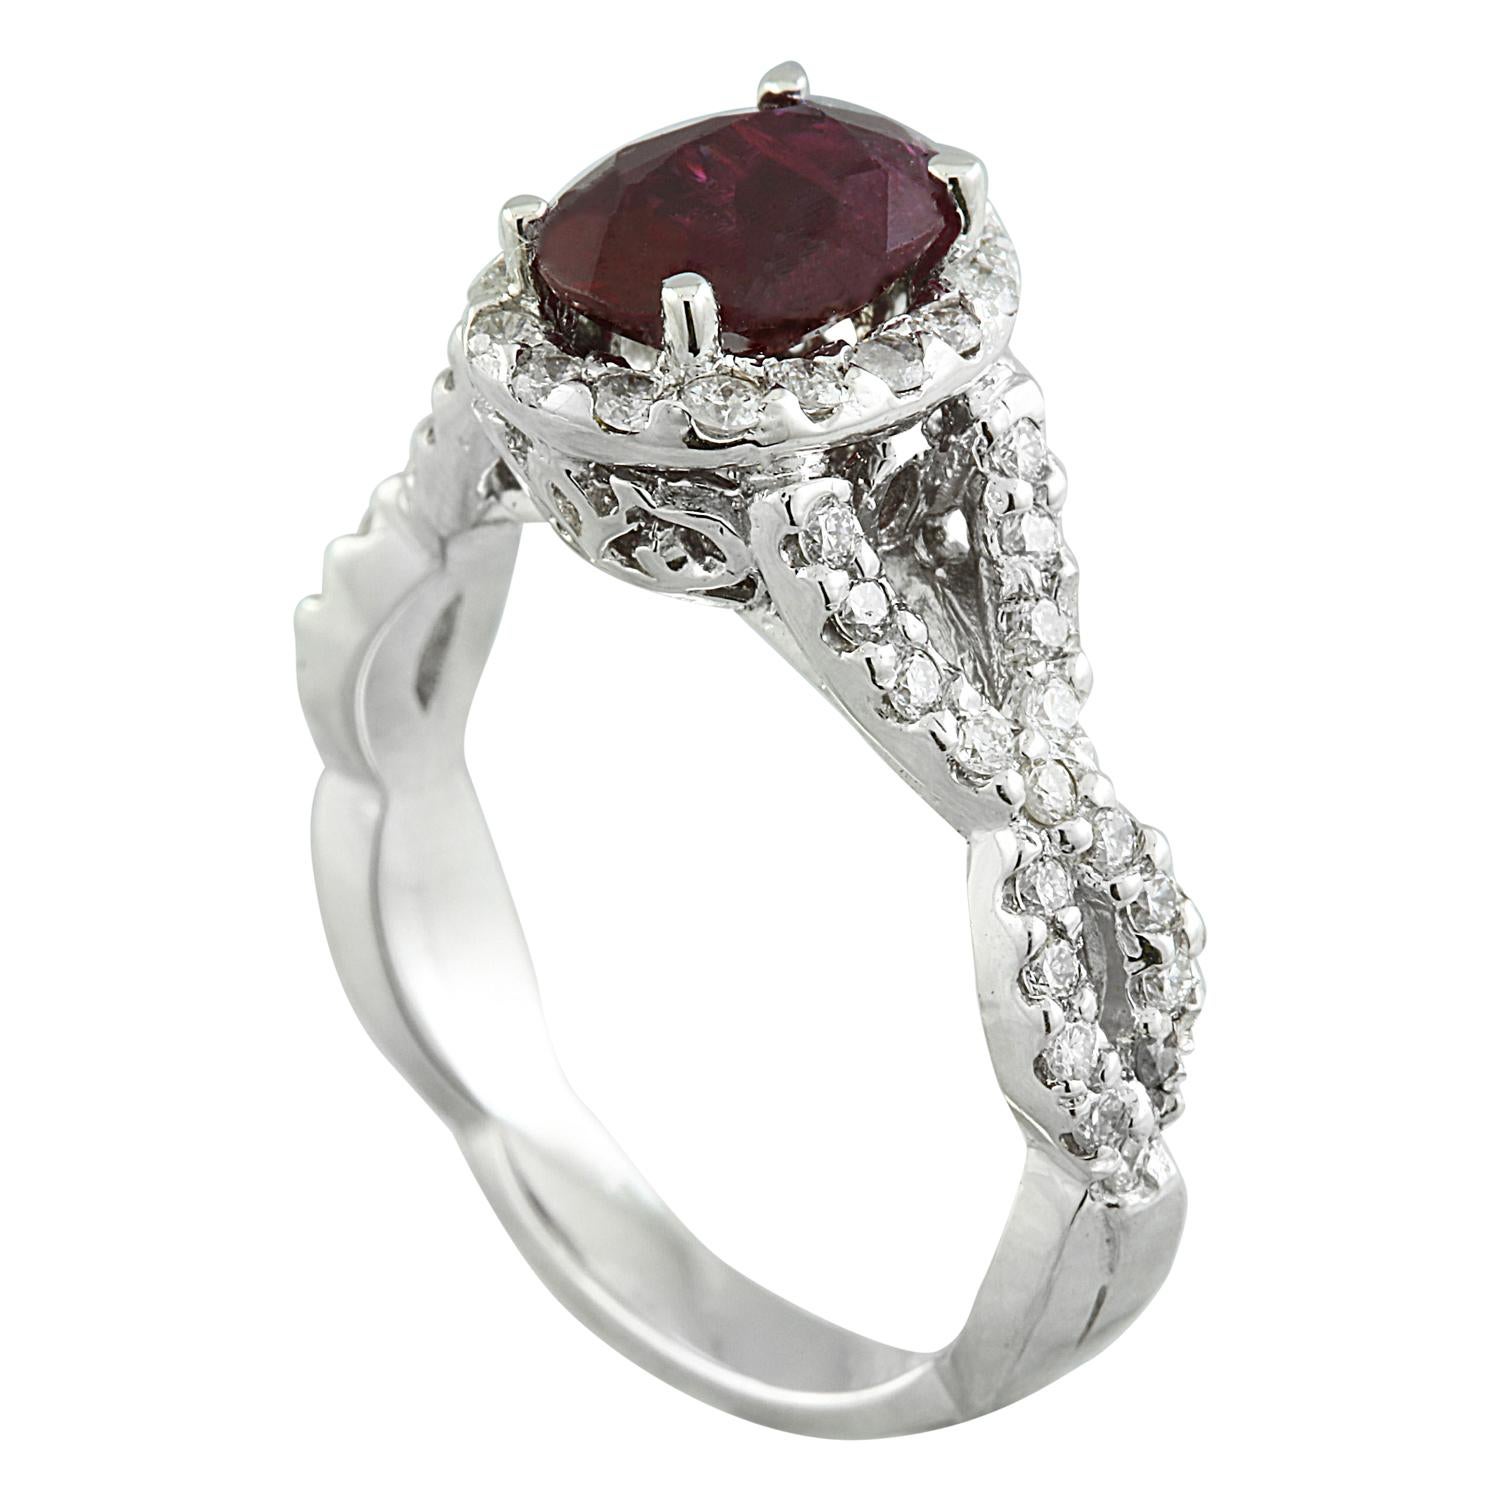 2.23 Carat Natural Ruby 14 Karat Solid White Gold Diamond Ring
Stamped: 14K 
Total Ring Weight: 5.1 Grams 
Ruby Weight: 1.63 Carat (8.00x6.00 Millimeters)  
Diamond Weight: 0.60 carat (F-G Color, VS2-SI1 Clarity )
Face Measures: 10.70x9.00